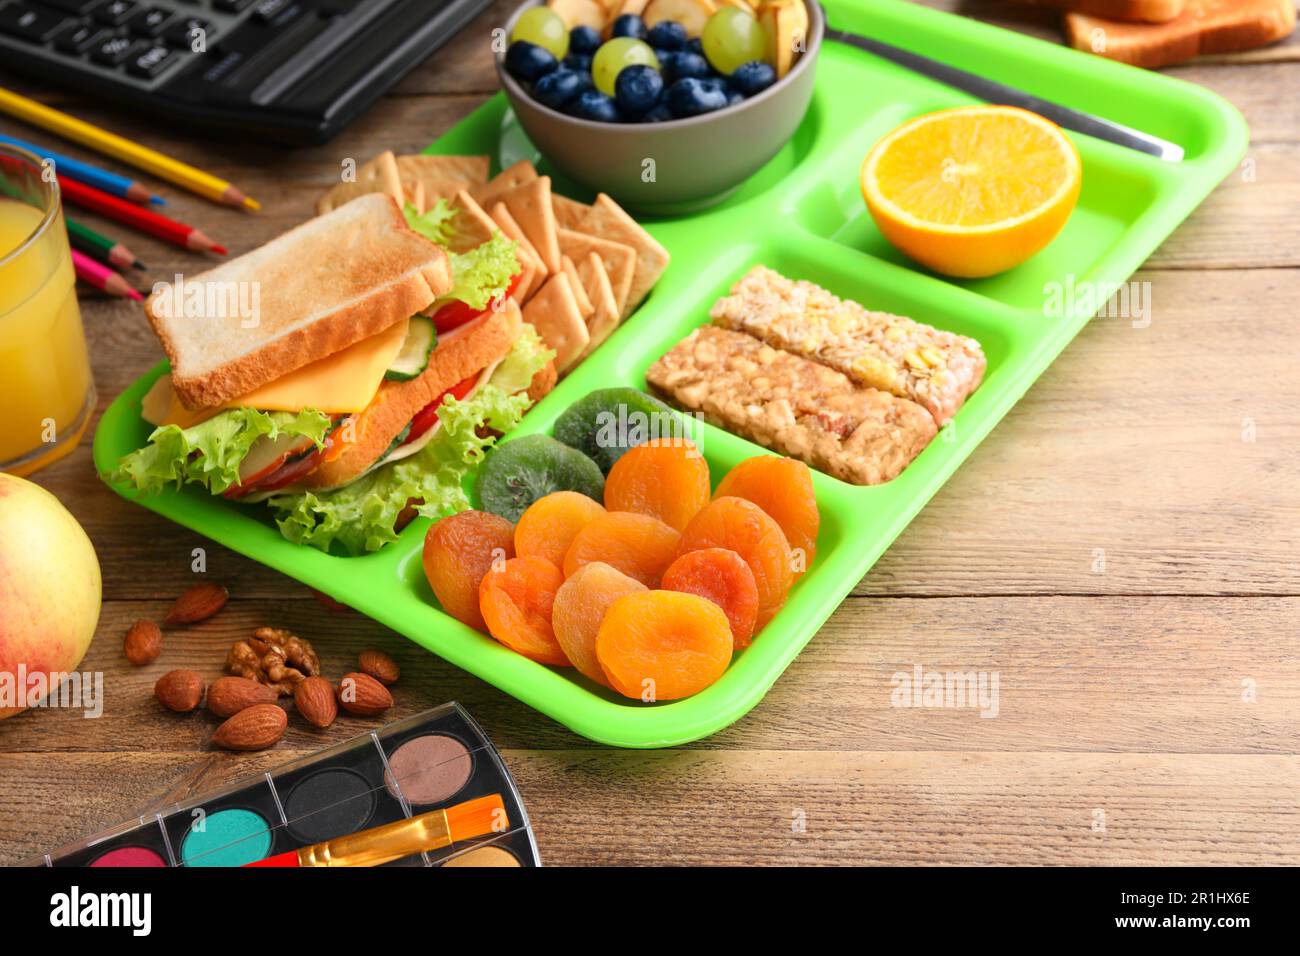 Serving tray of healthy food and stationery on wooden table. School lunch Stock Photo